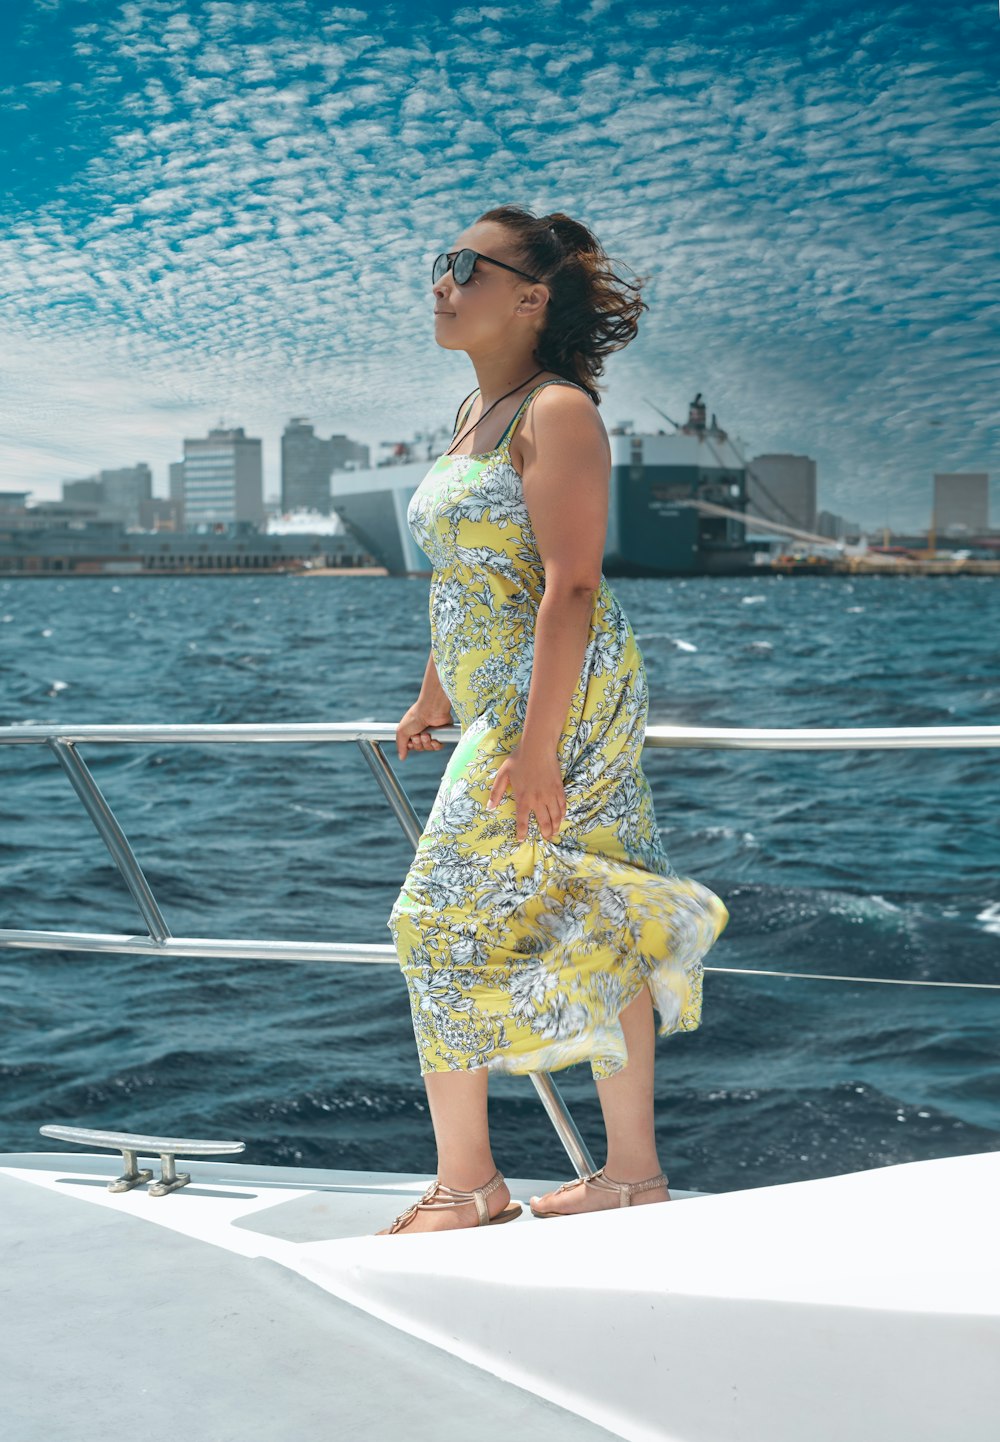 woman in yellow and white floral spaghetti strap dress standing on boat during daytime